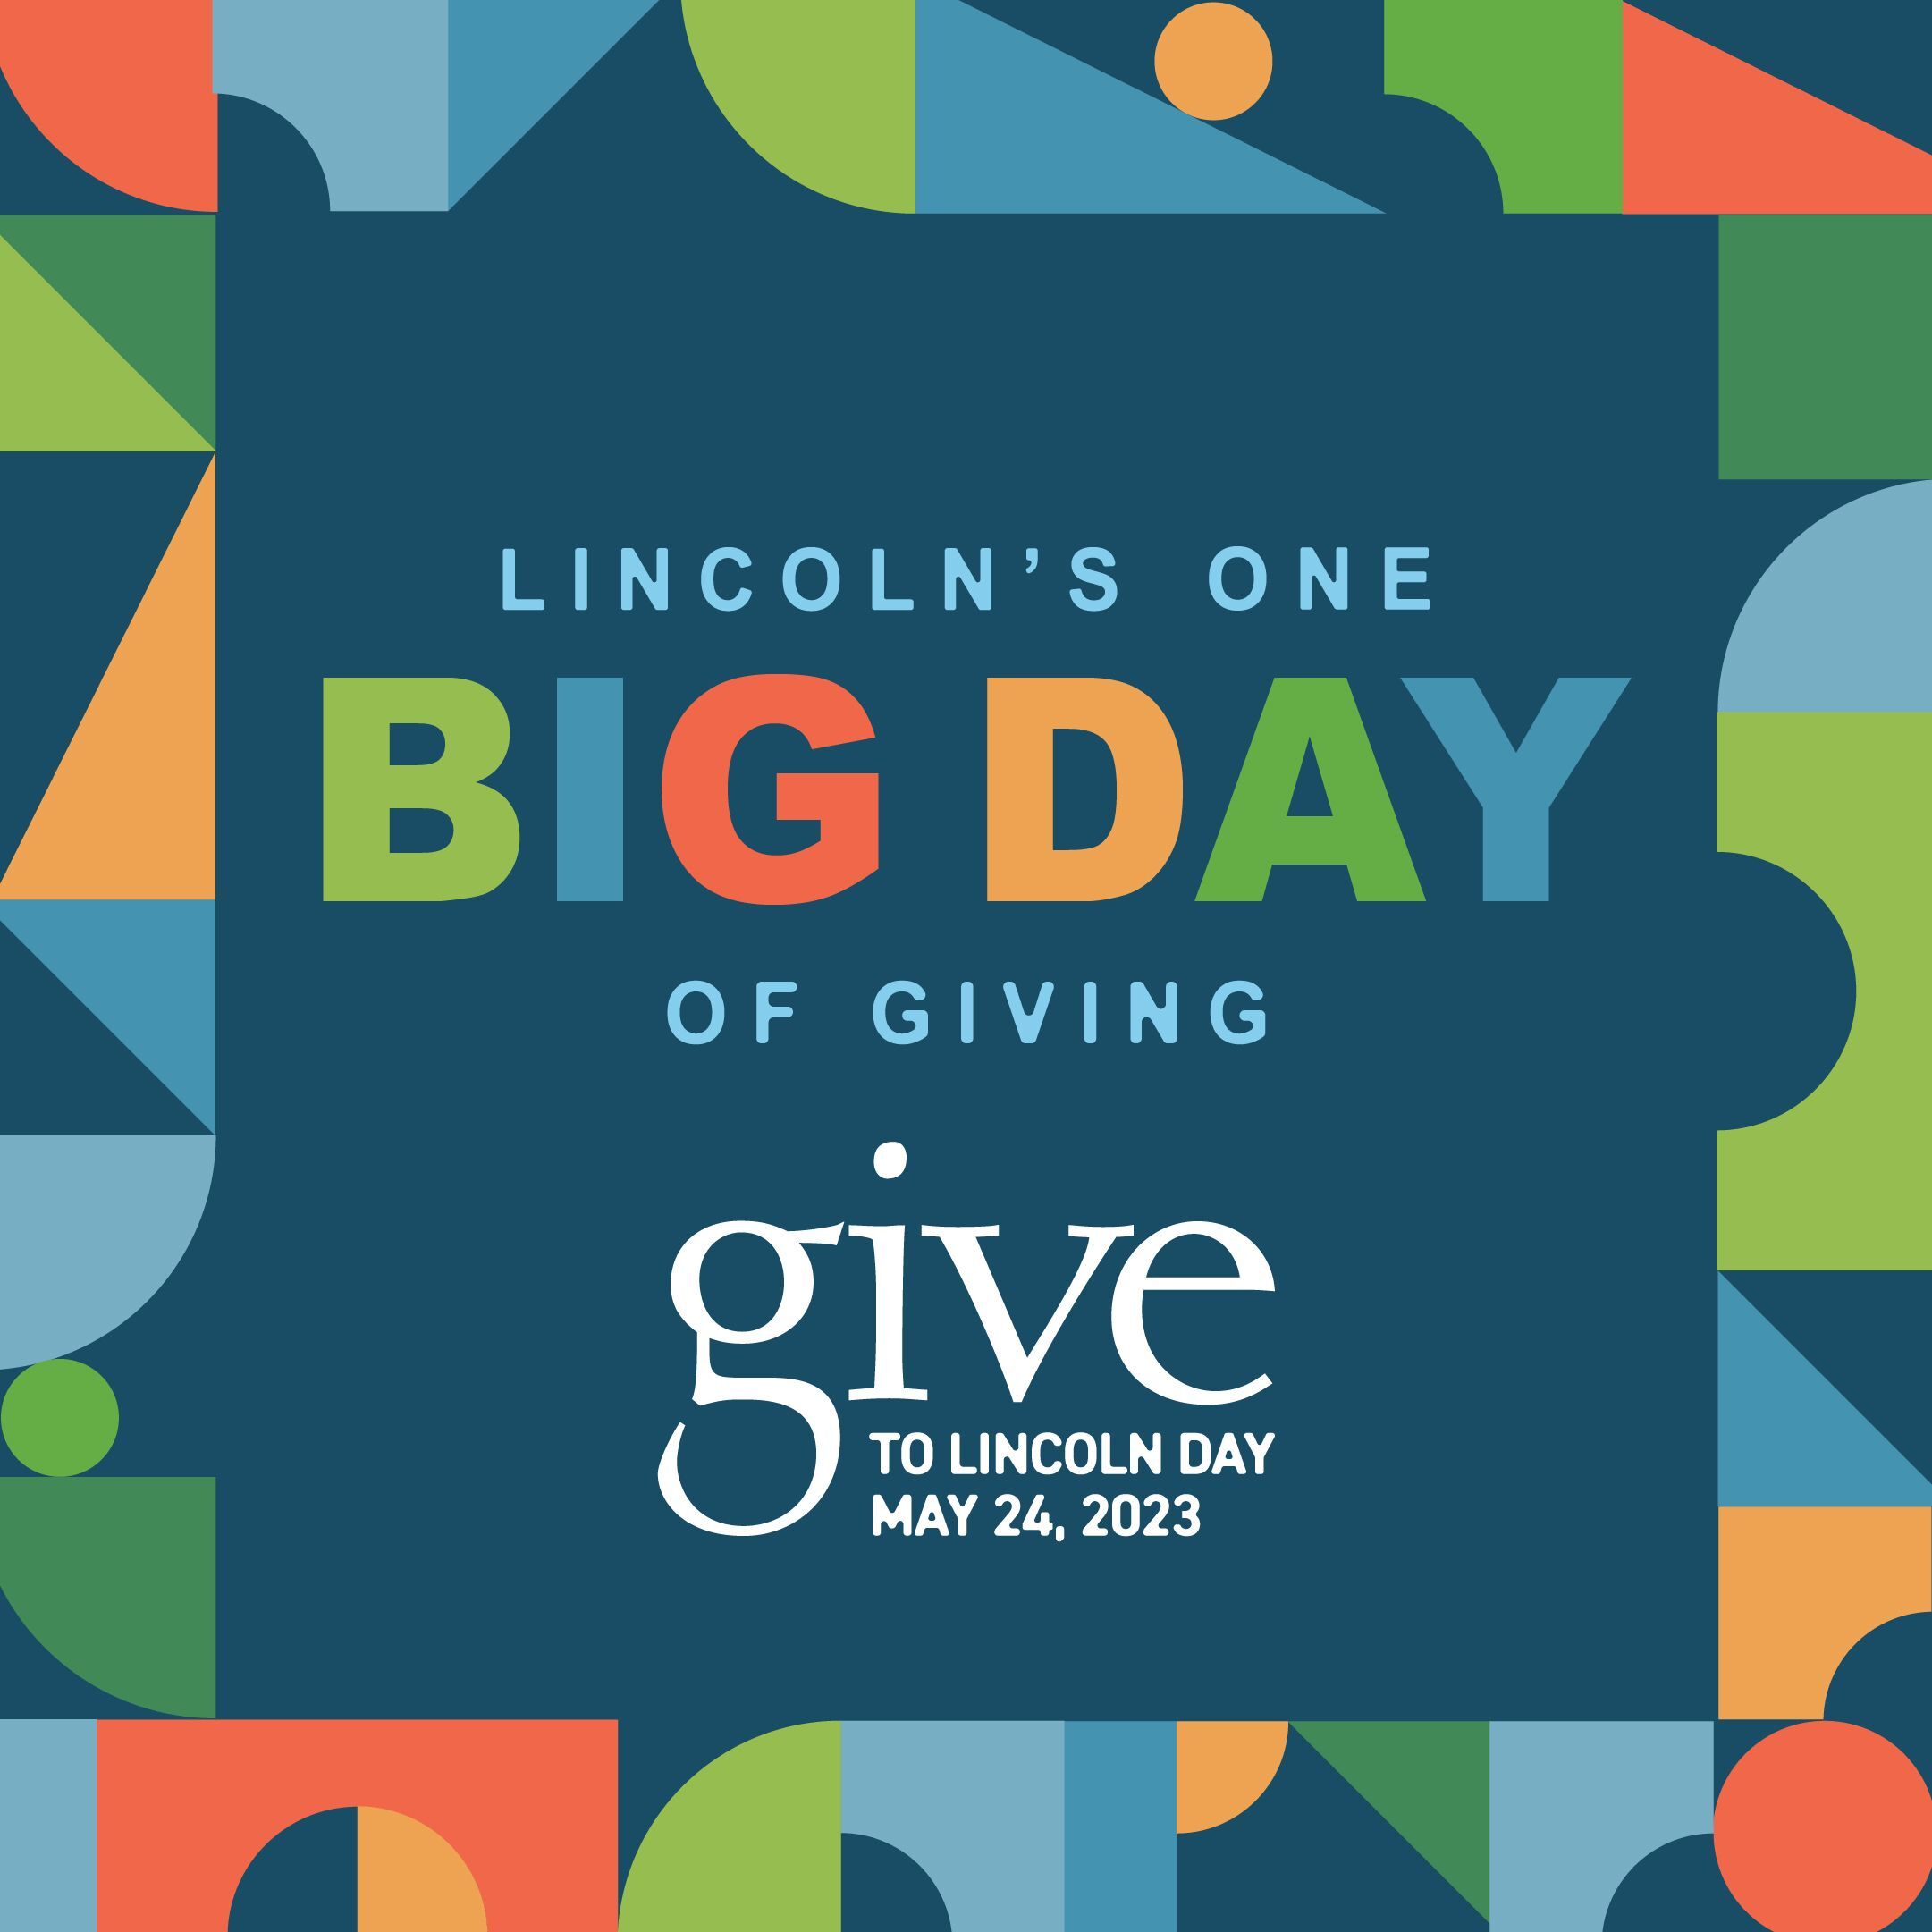 Celebrate Give to Lincoln Day